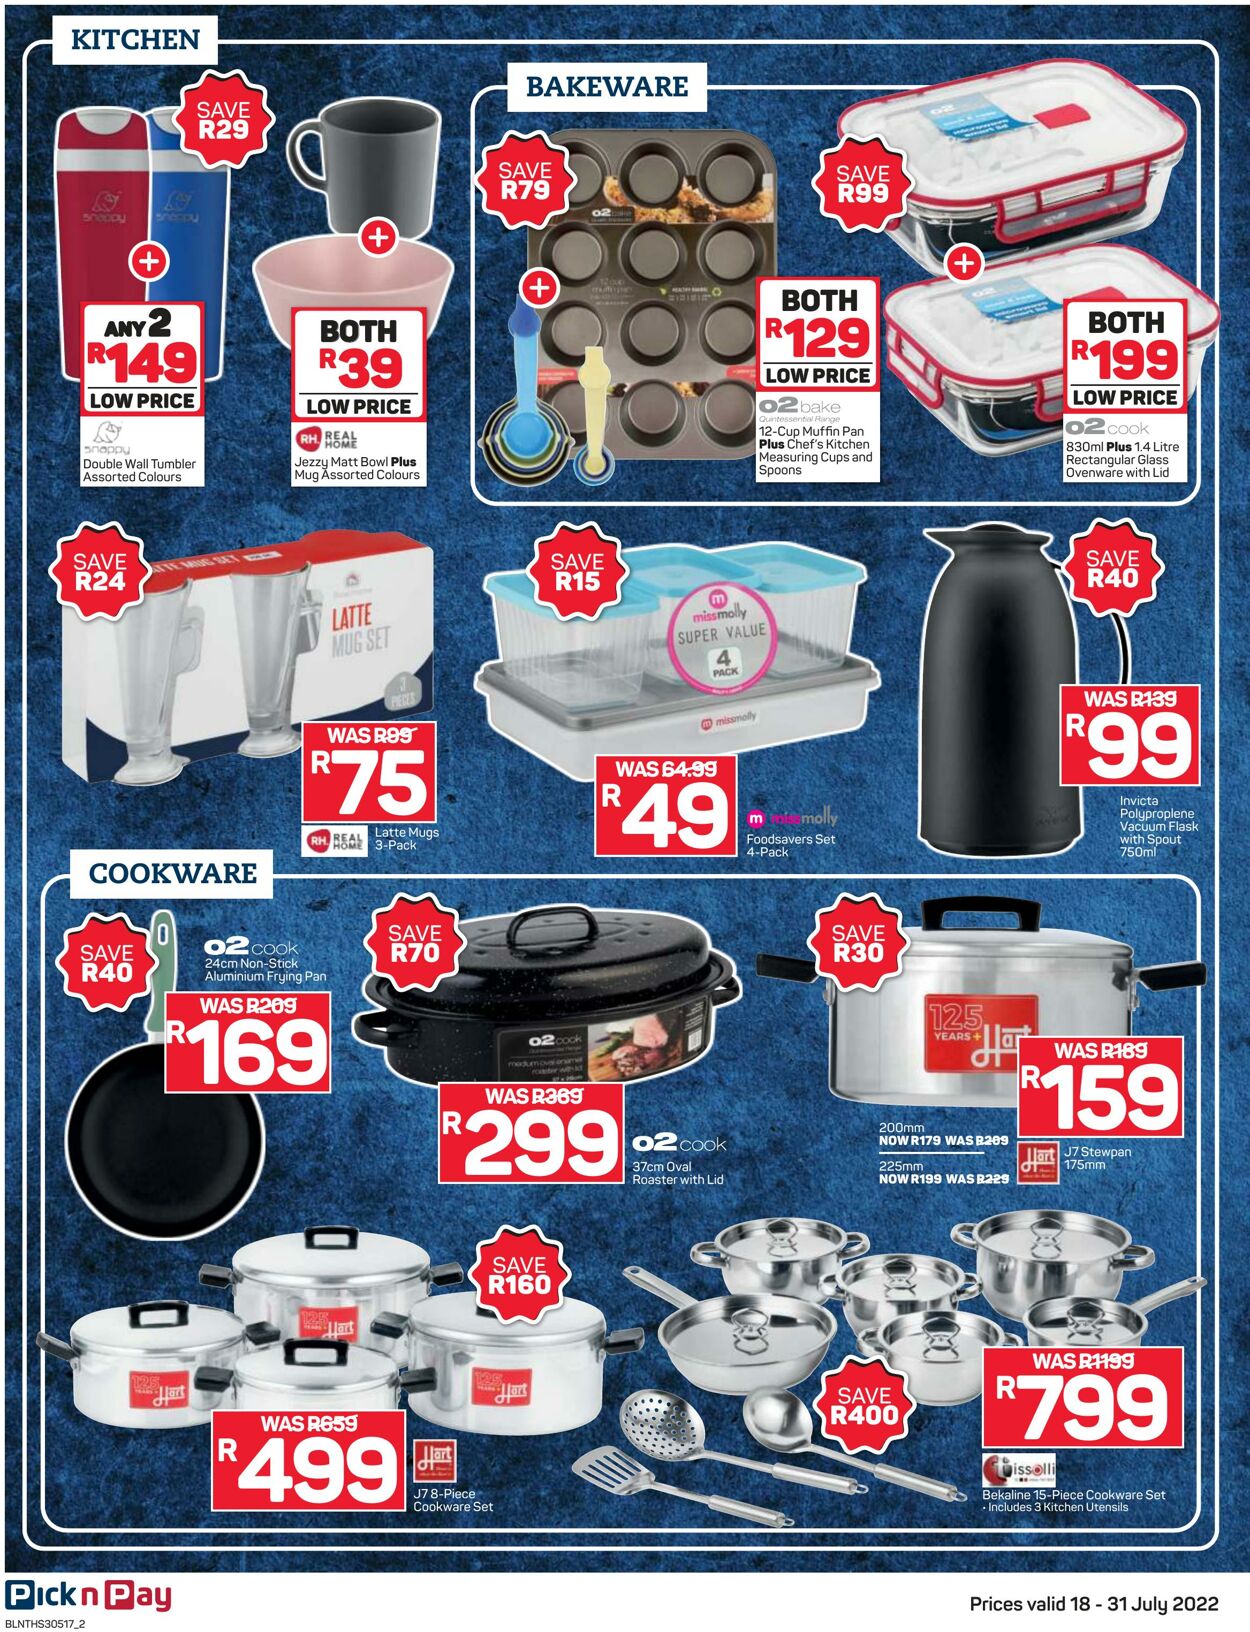 Special Pick n Pay 18.07.2022 - 31.07.2022